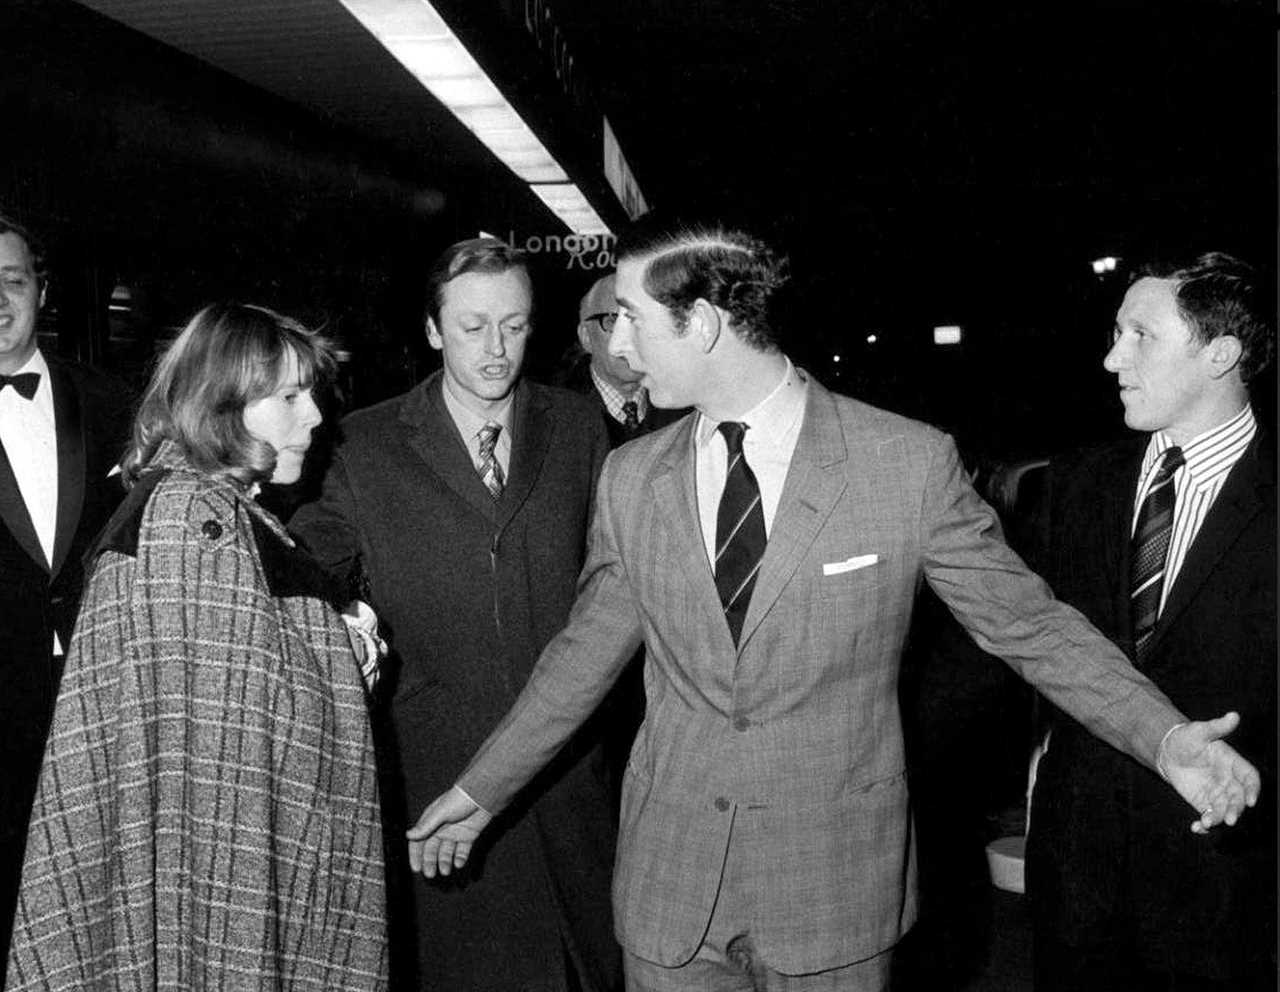 Mandatory Credit: Photo by Press Portrait Service/Shutterstock (225294d) Prince Charles with Andrew and wife Camilla Parker Bowles leaving the Royal Opera House on 14 Feb 1975 PRINCE CHARLES AND CAMILLA PARKER BOWLES 1975